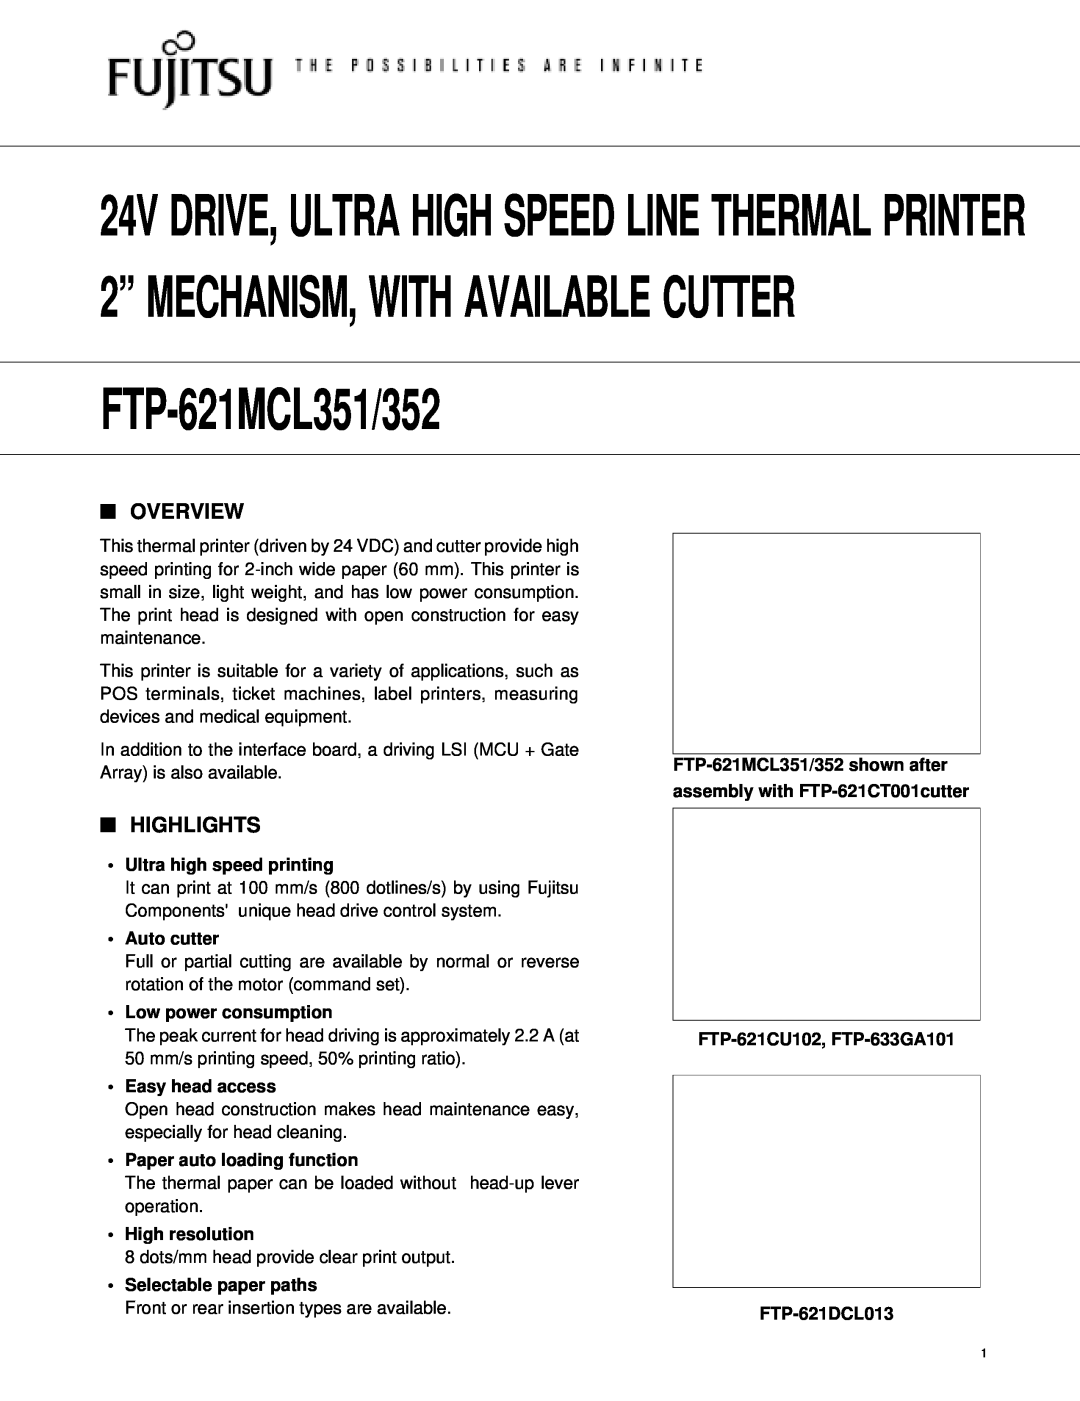 Fujitsu FTP-621CT001 manual Overview, Highlights, Ultra high speed printing, Auto cutter, Low power consumption 